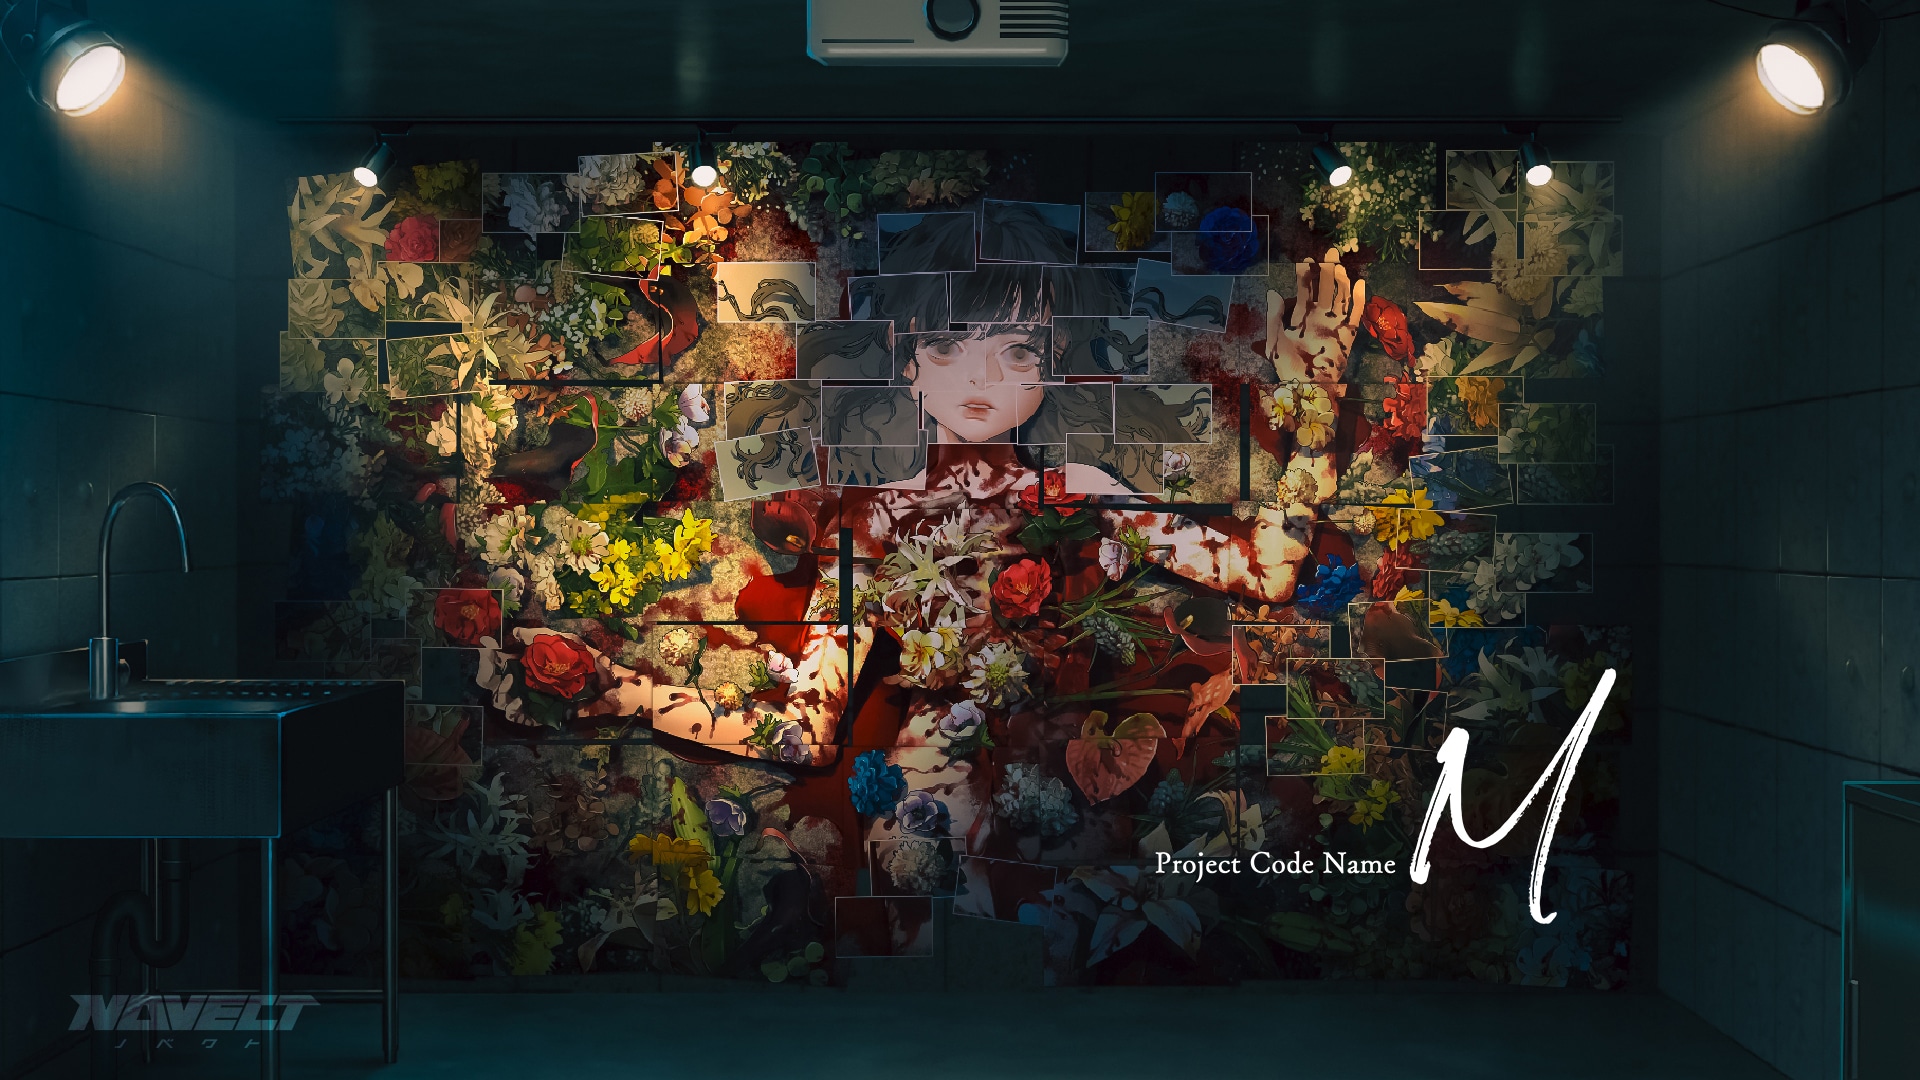 The House in Fata Morgana Developer Announces New Game, Project Code Name “M” for PC, PS4 & Switch; Teaser Trailer & Opening Song Shared